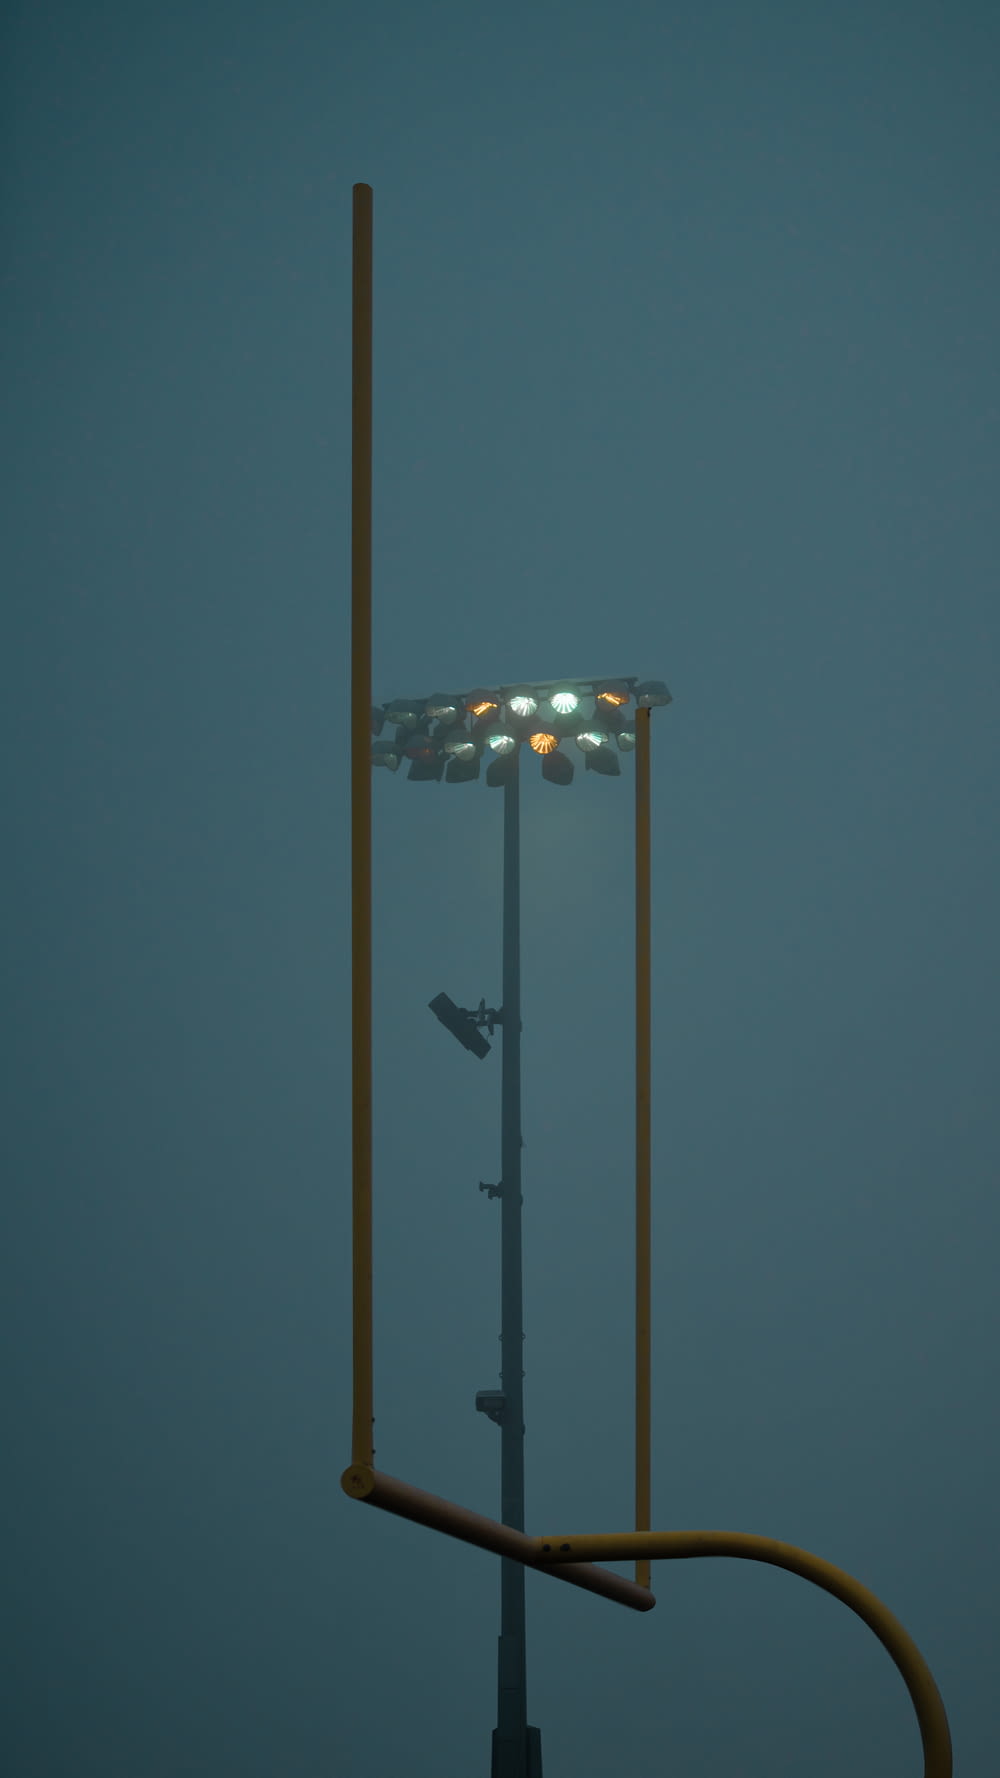 a tall light pole with a street light on top of it